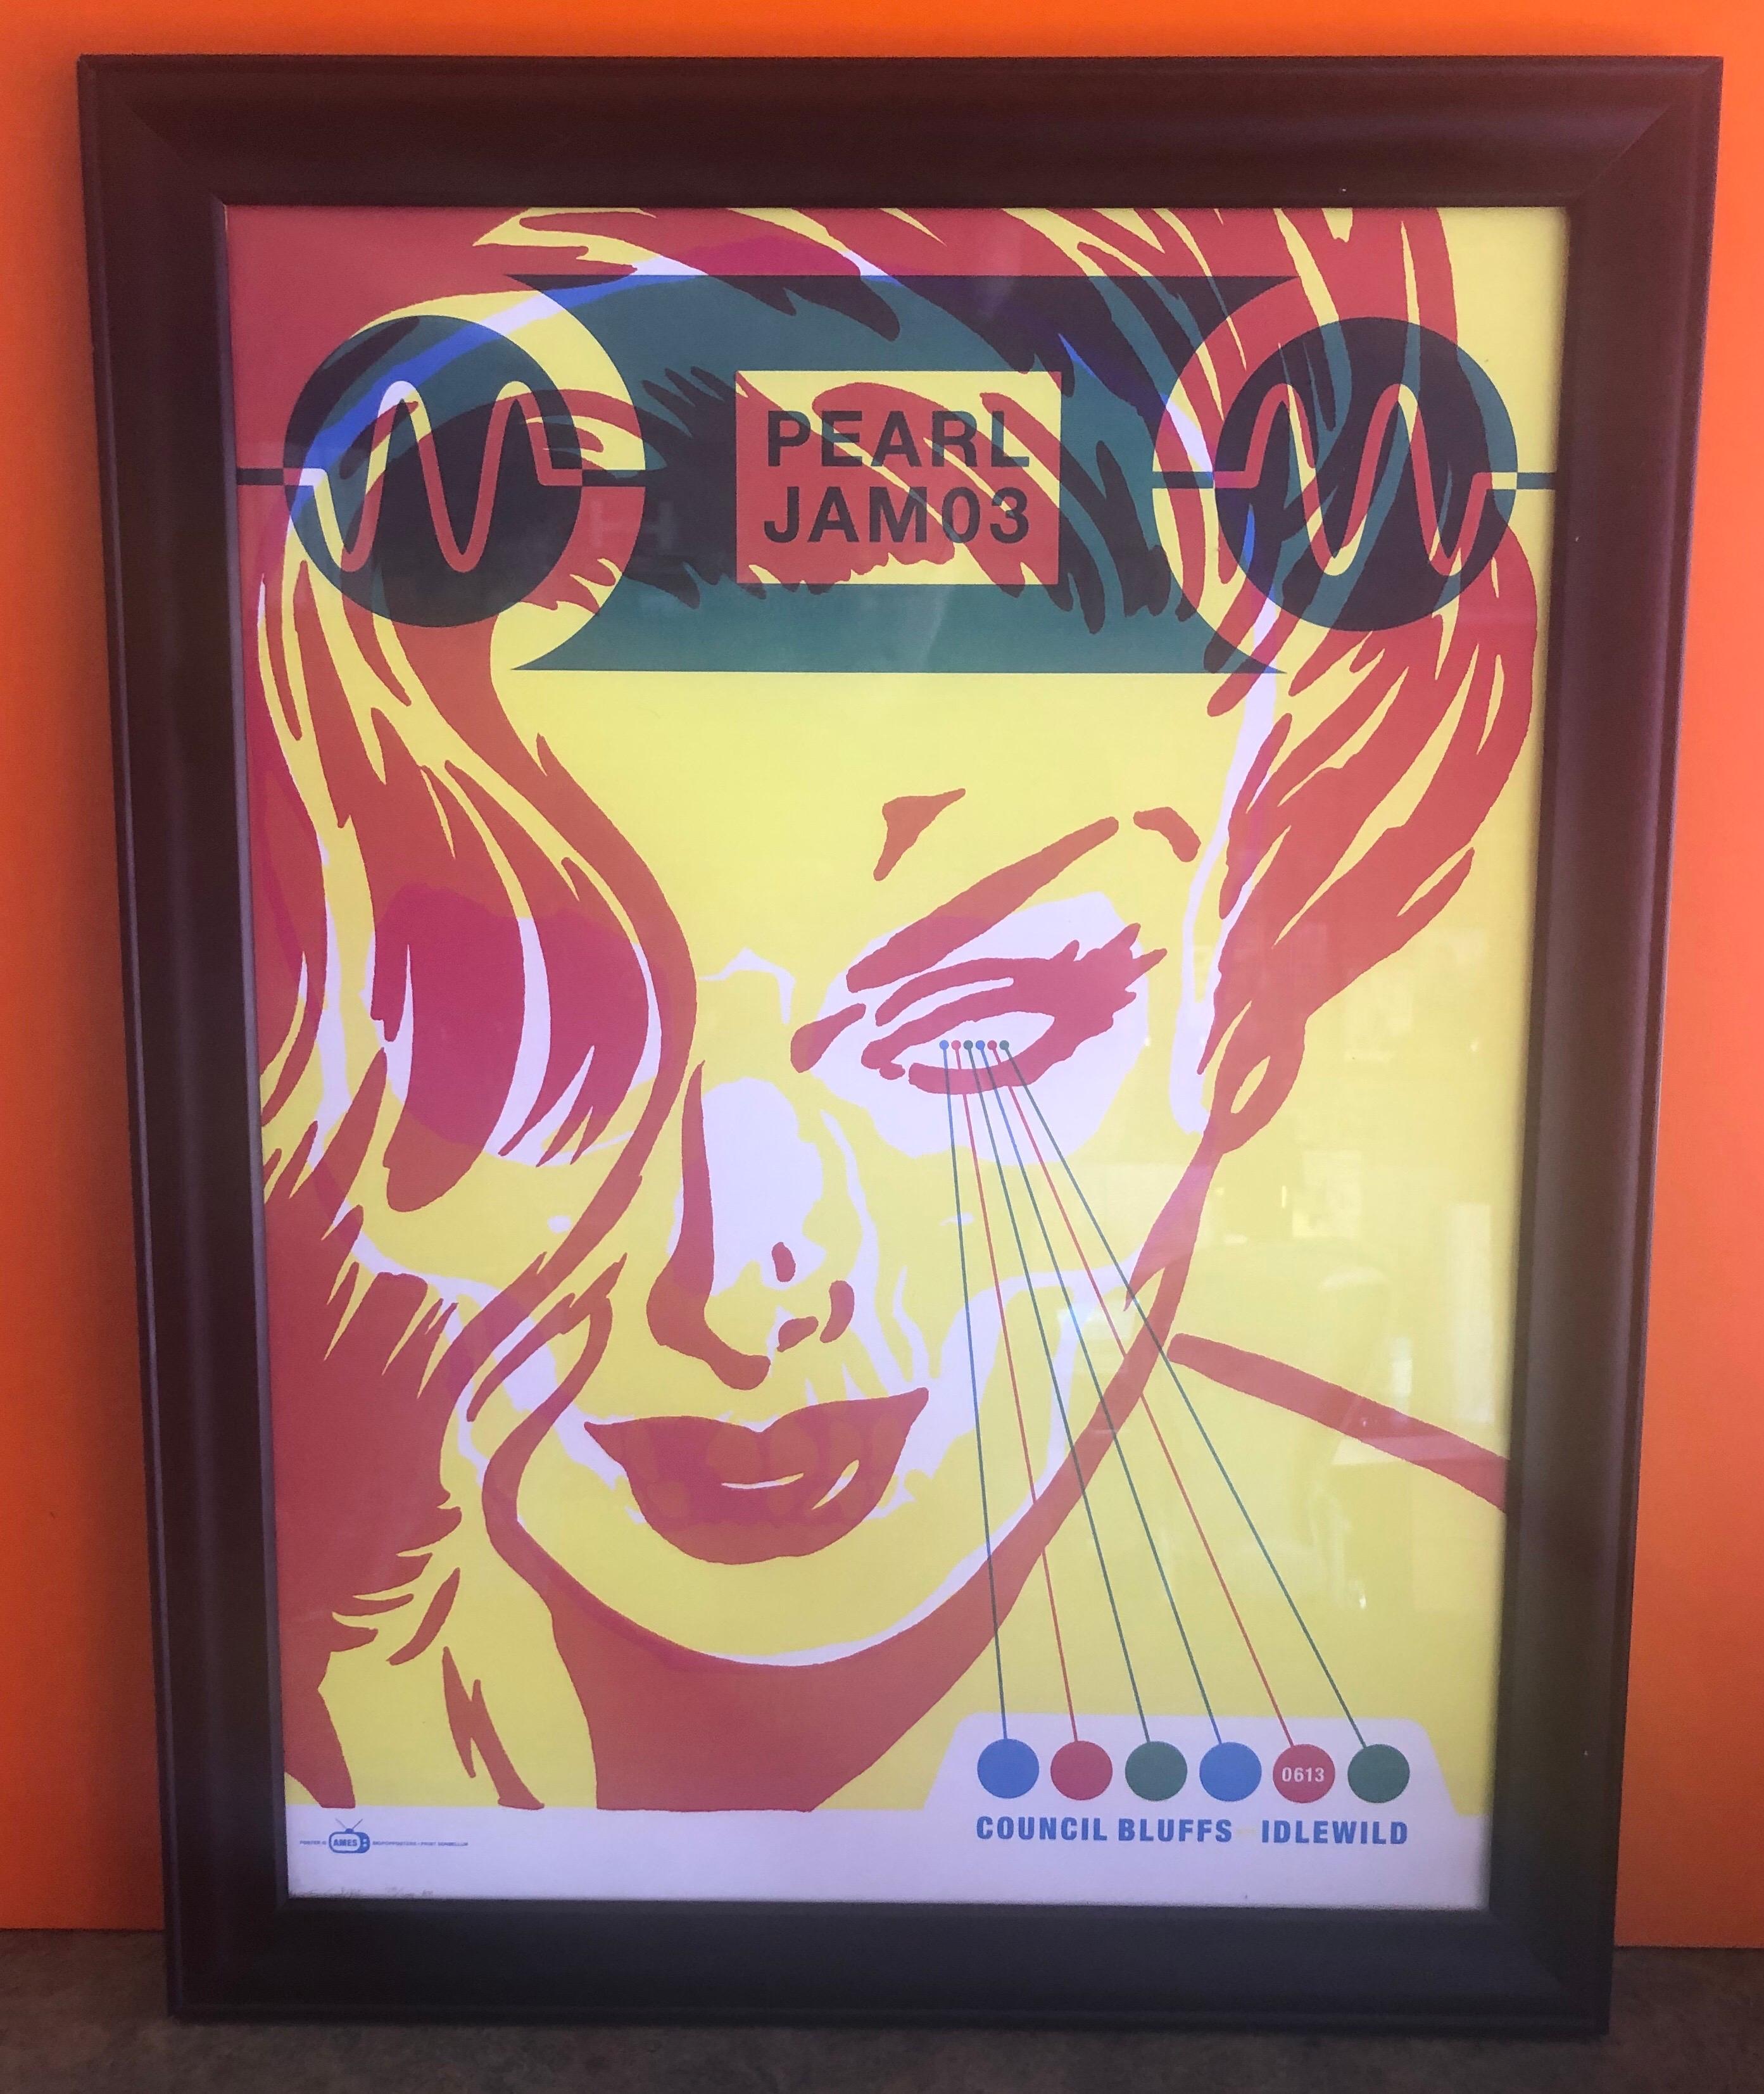 Highly collectible 2003 Pearl Jam concert poster live at the Mid-America Center in Council Bluffs, IA The concert took place on June 13, 2003. The screen print was designed by Ames Design and is signed in the lower left by the artist. It is from an